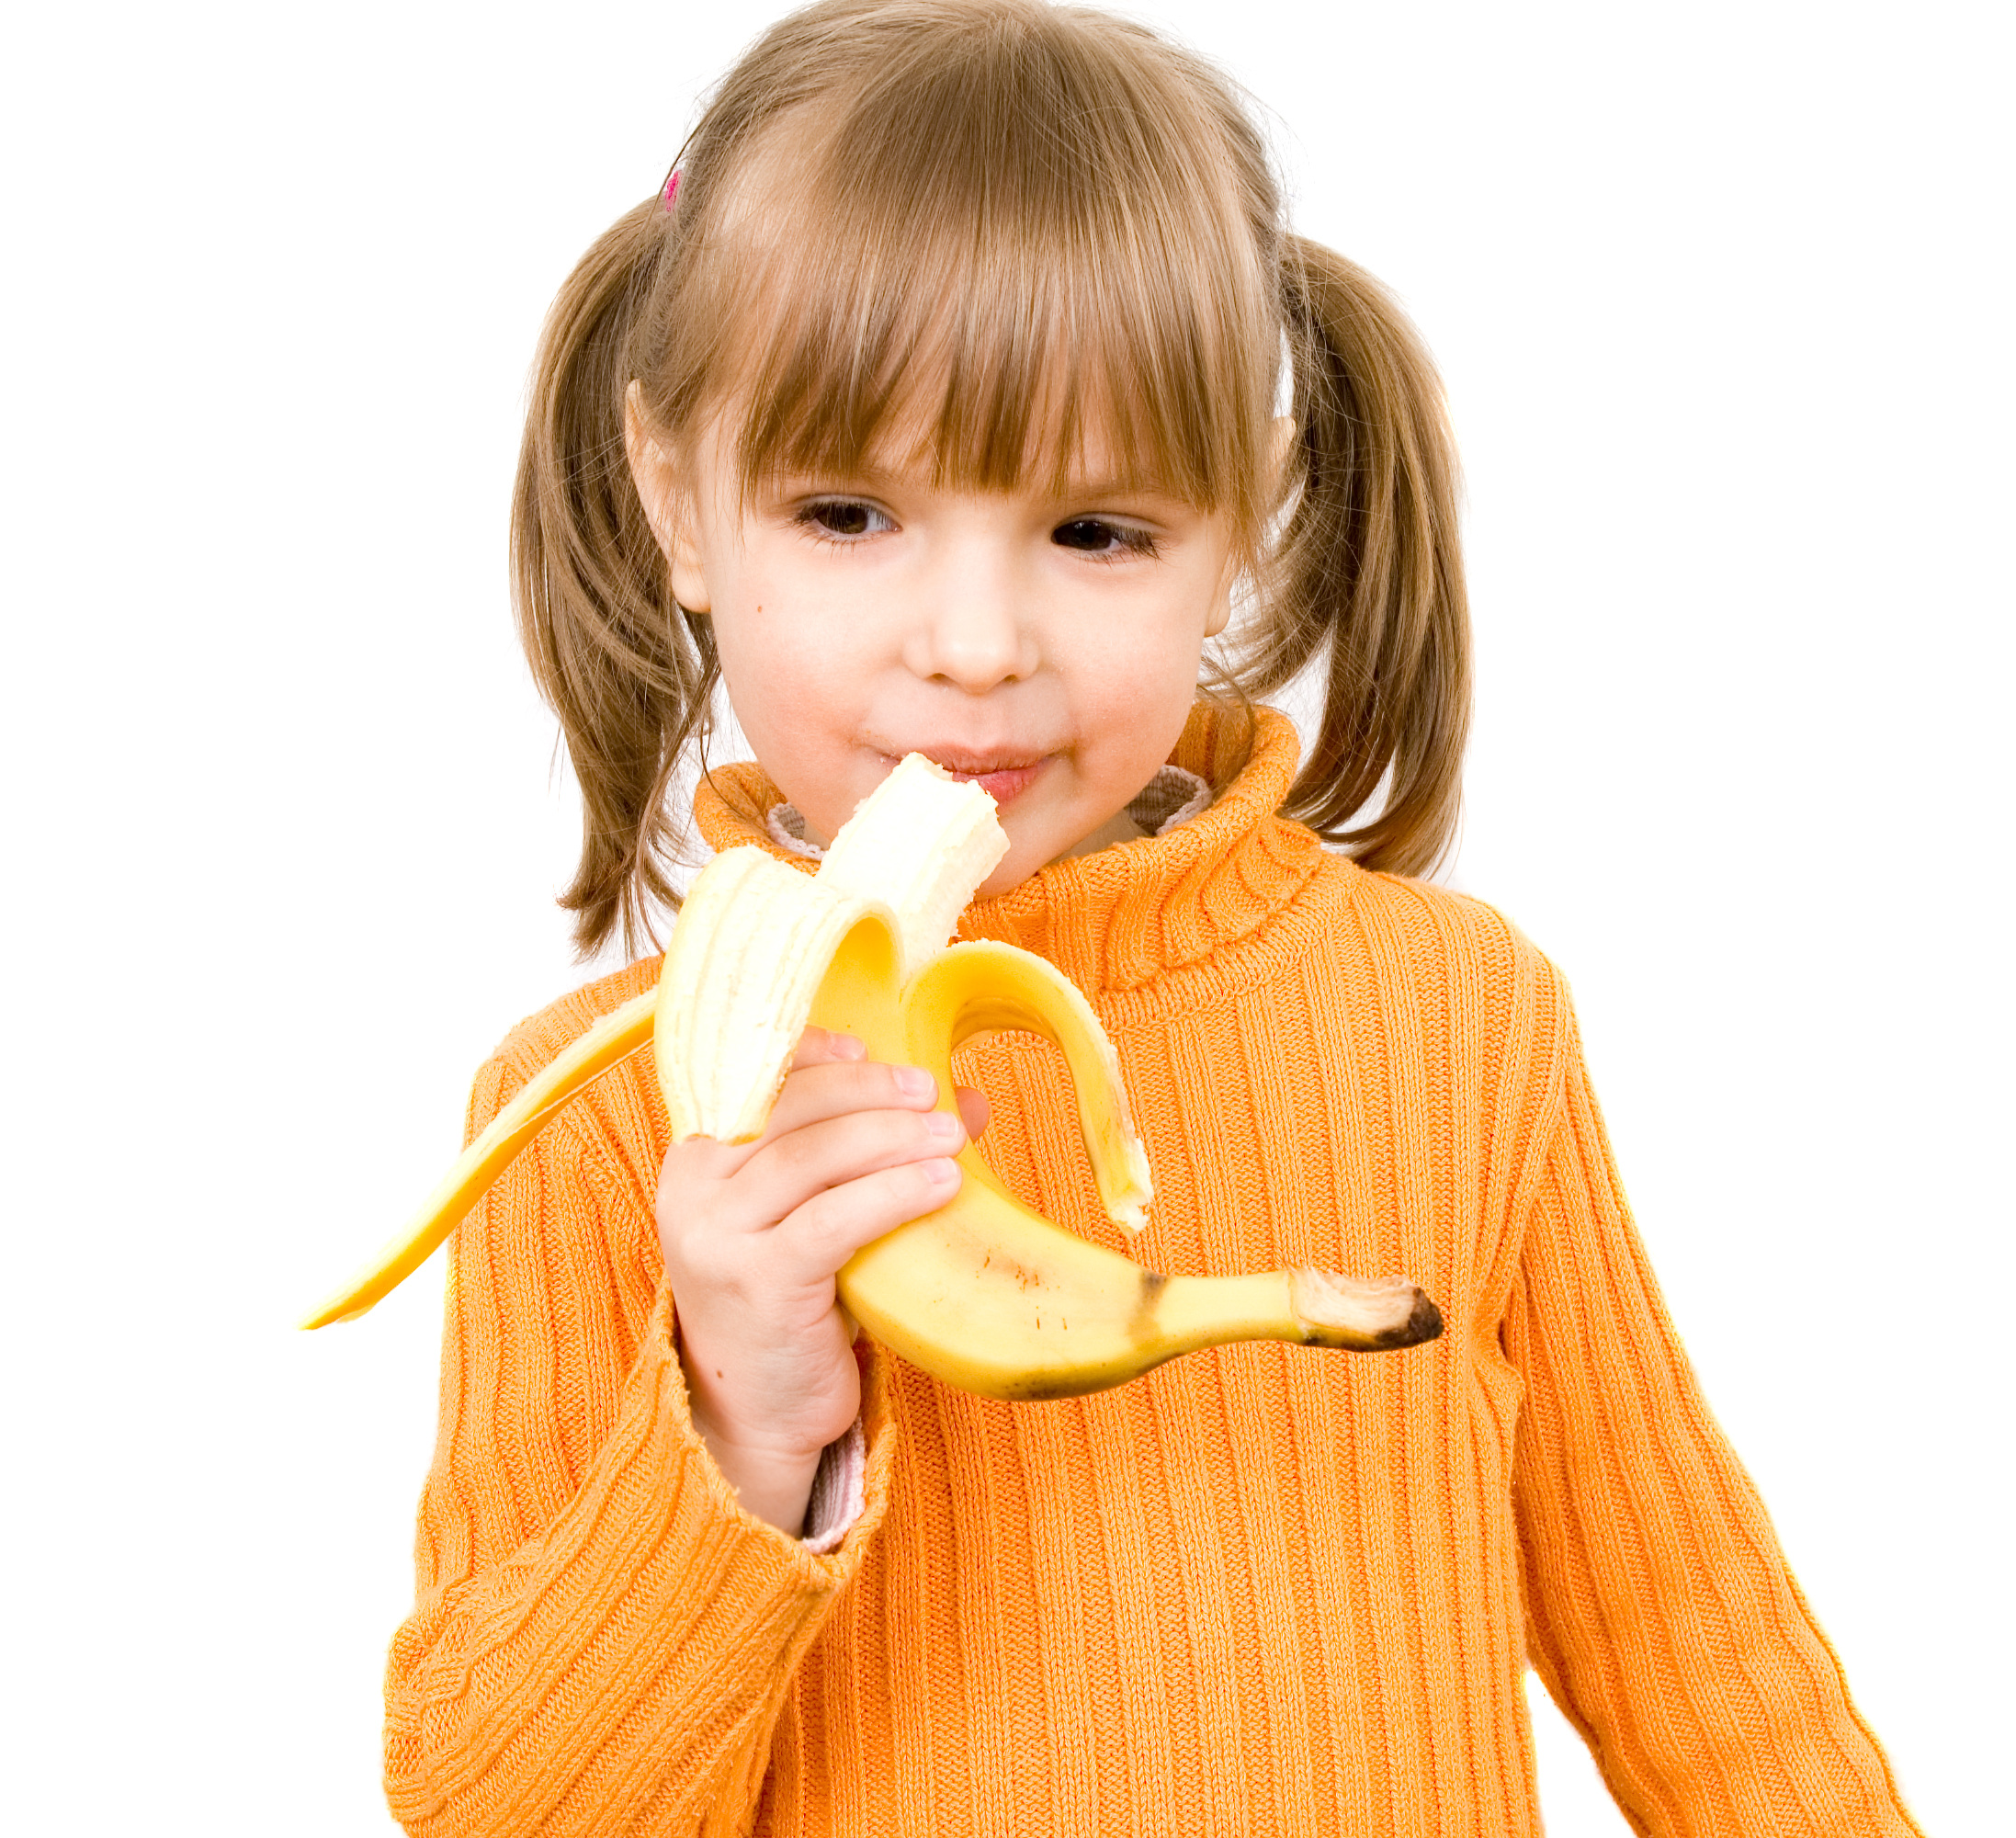 Young girl with pigtails in an orange jumper eats a banana.